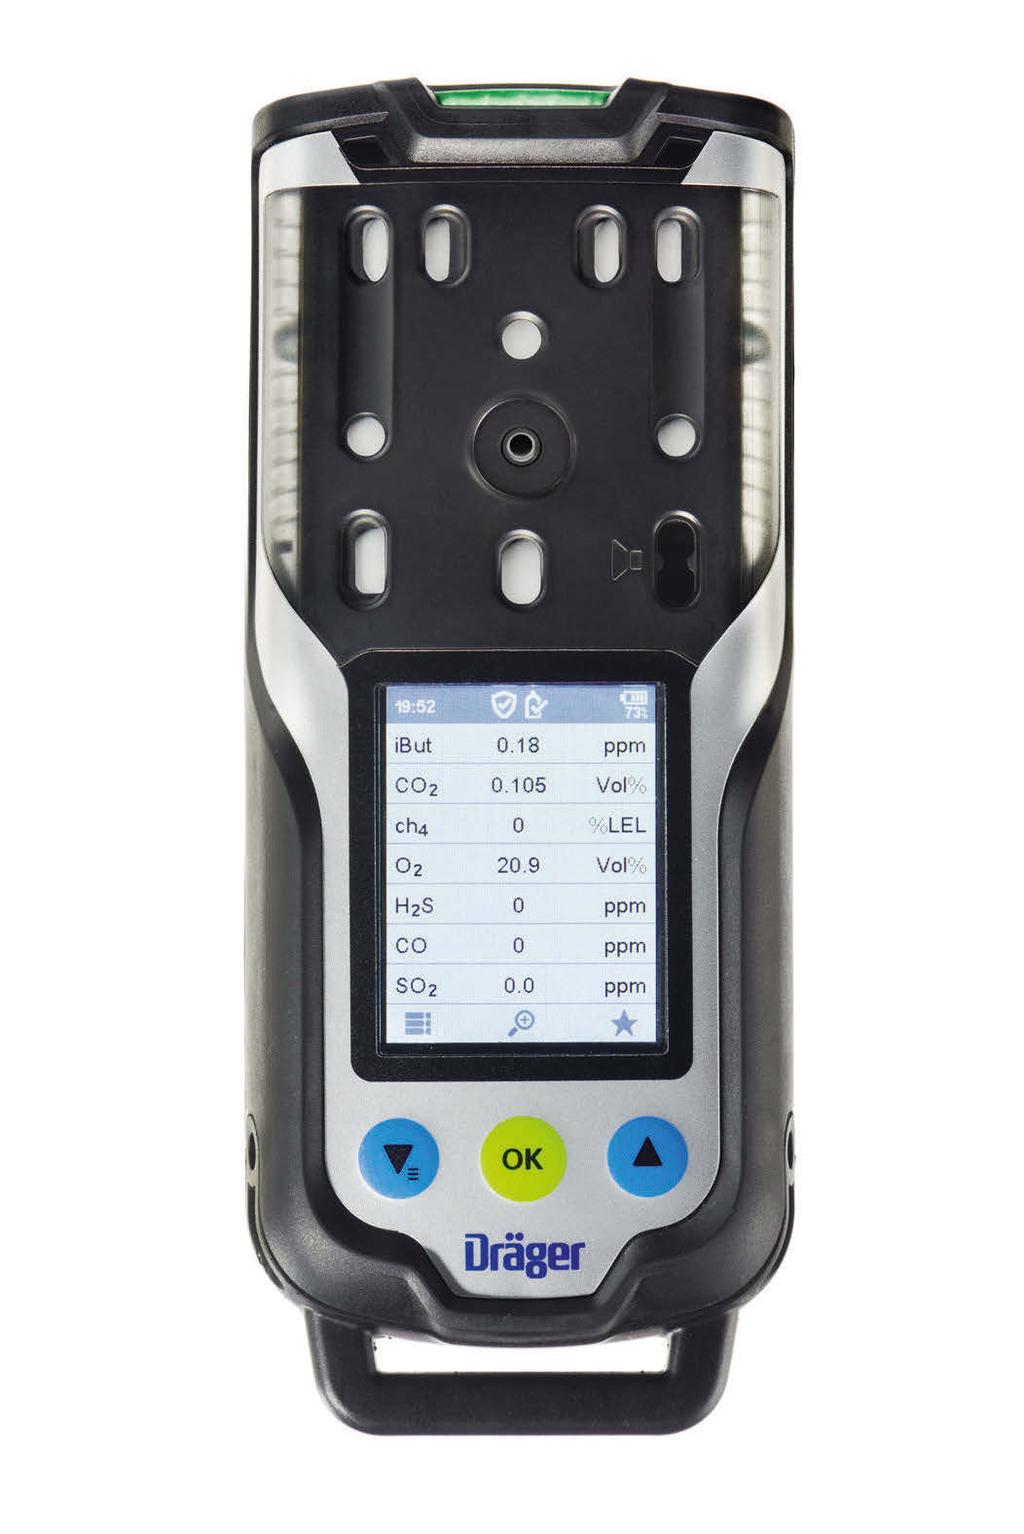 Dräger X-am 8000 Multi-Gas Detection Device Clearance measurement was never this easy and convenient: The Dräger X-am 8000 measures up to seven toxic as well as flammable gases, vapors and oxygen all